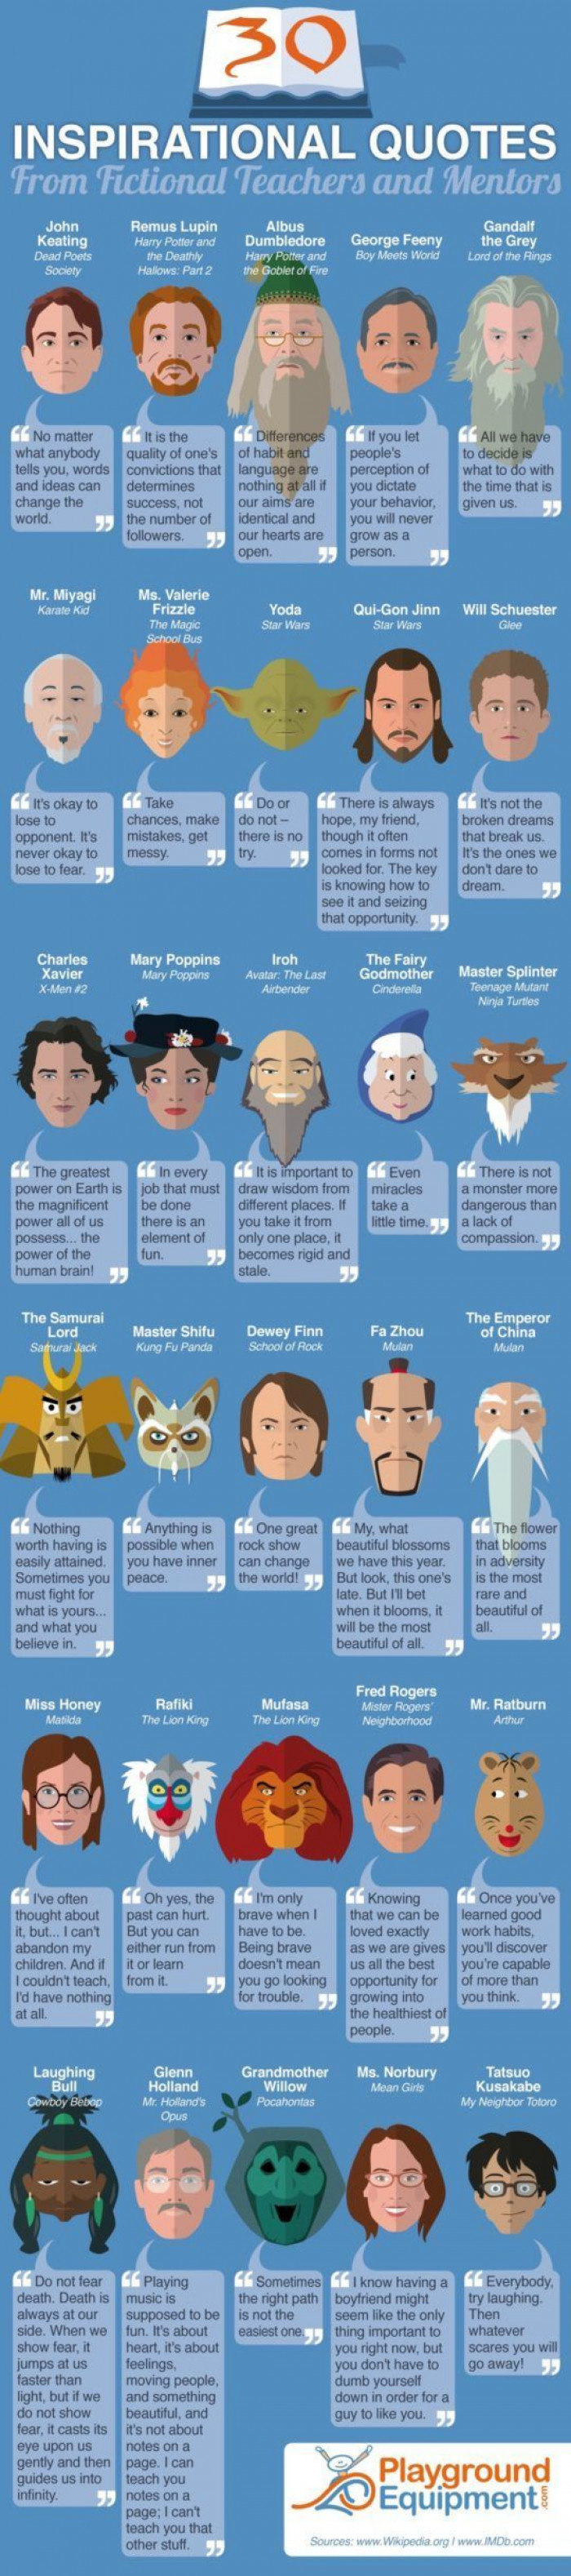 30 Inspirational Quotes From Your Favorite Fictional Characters 